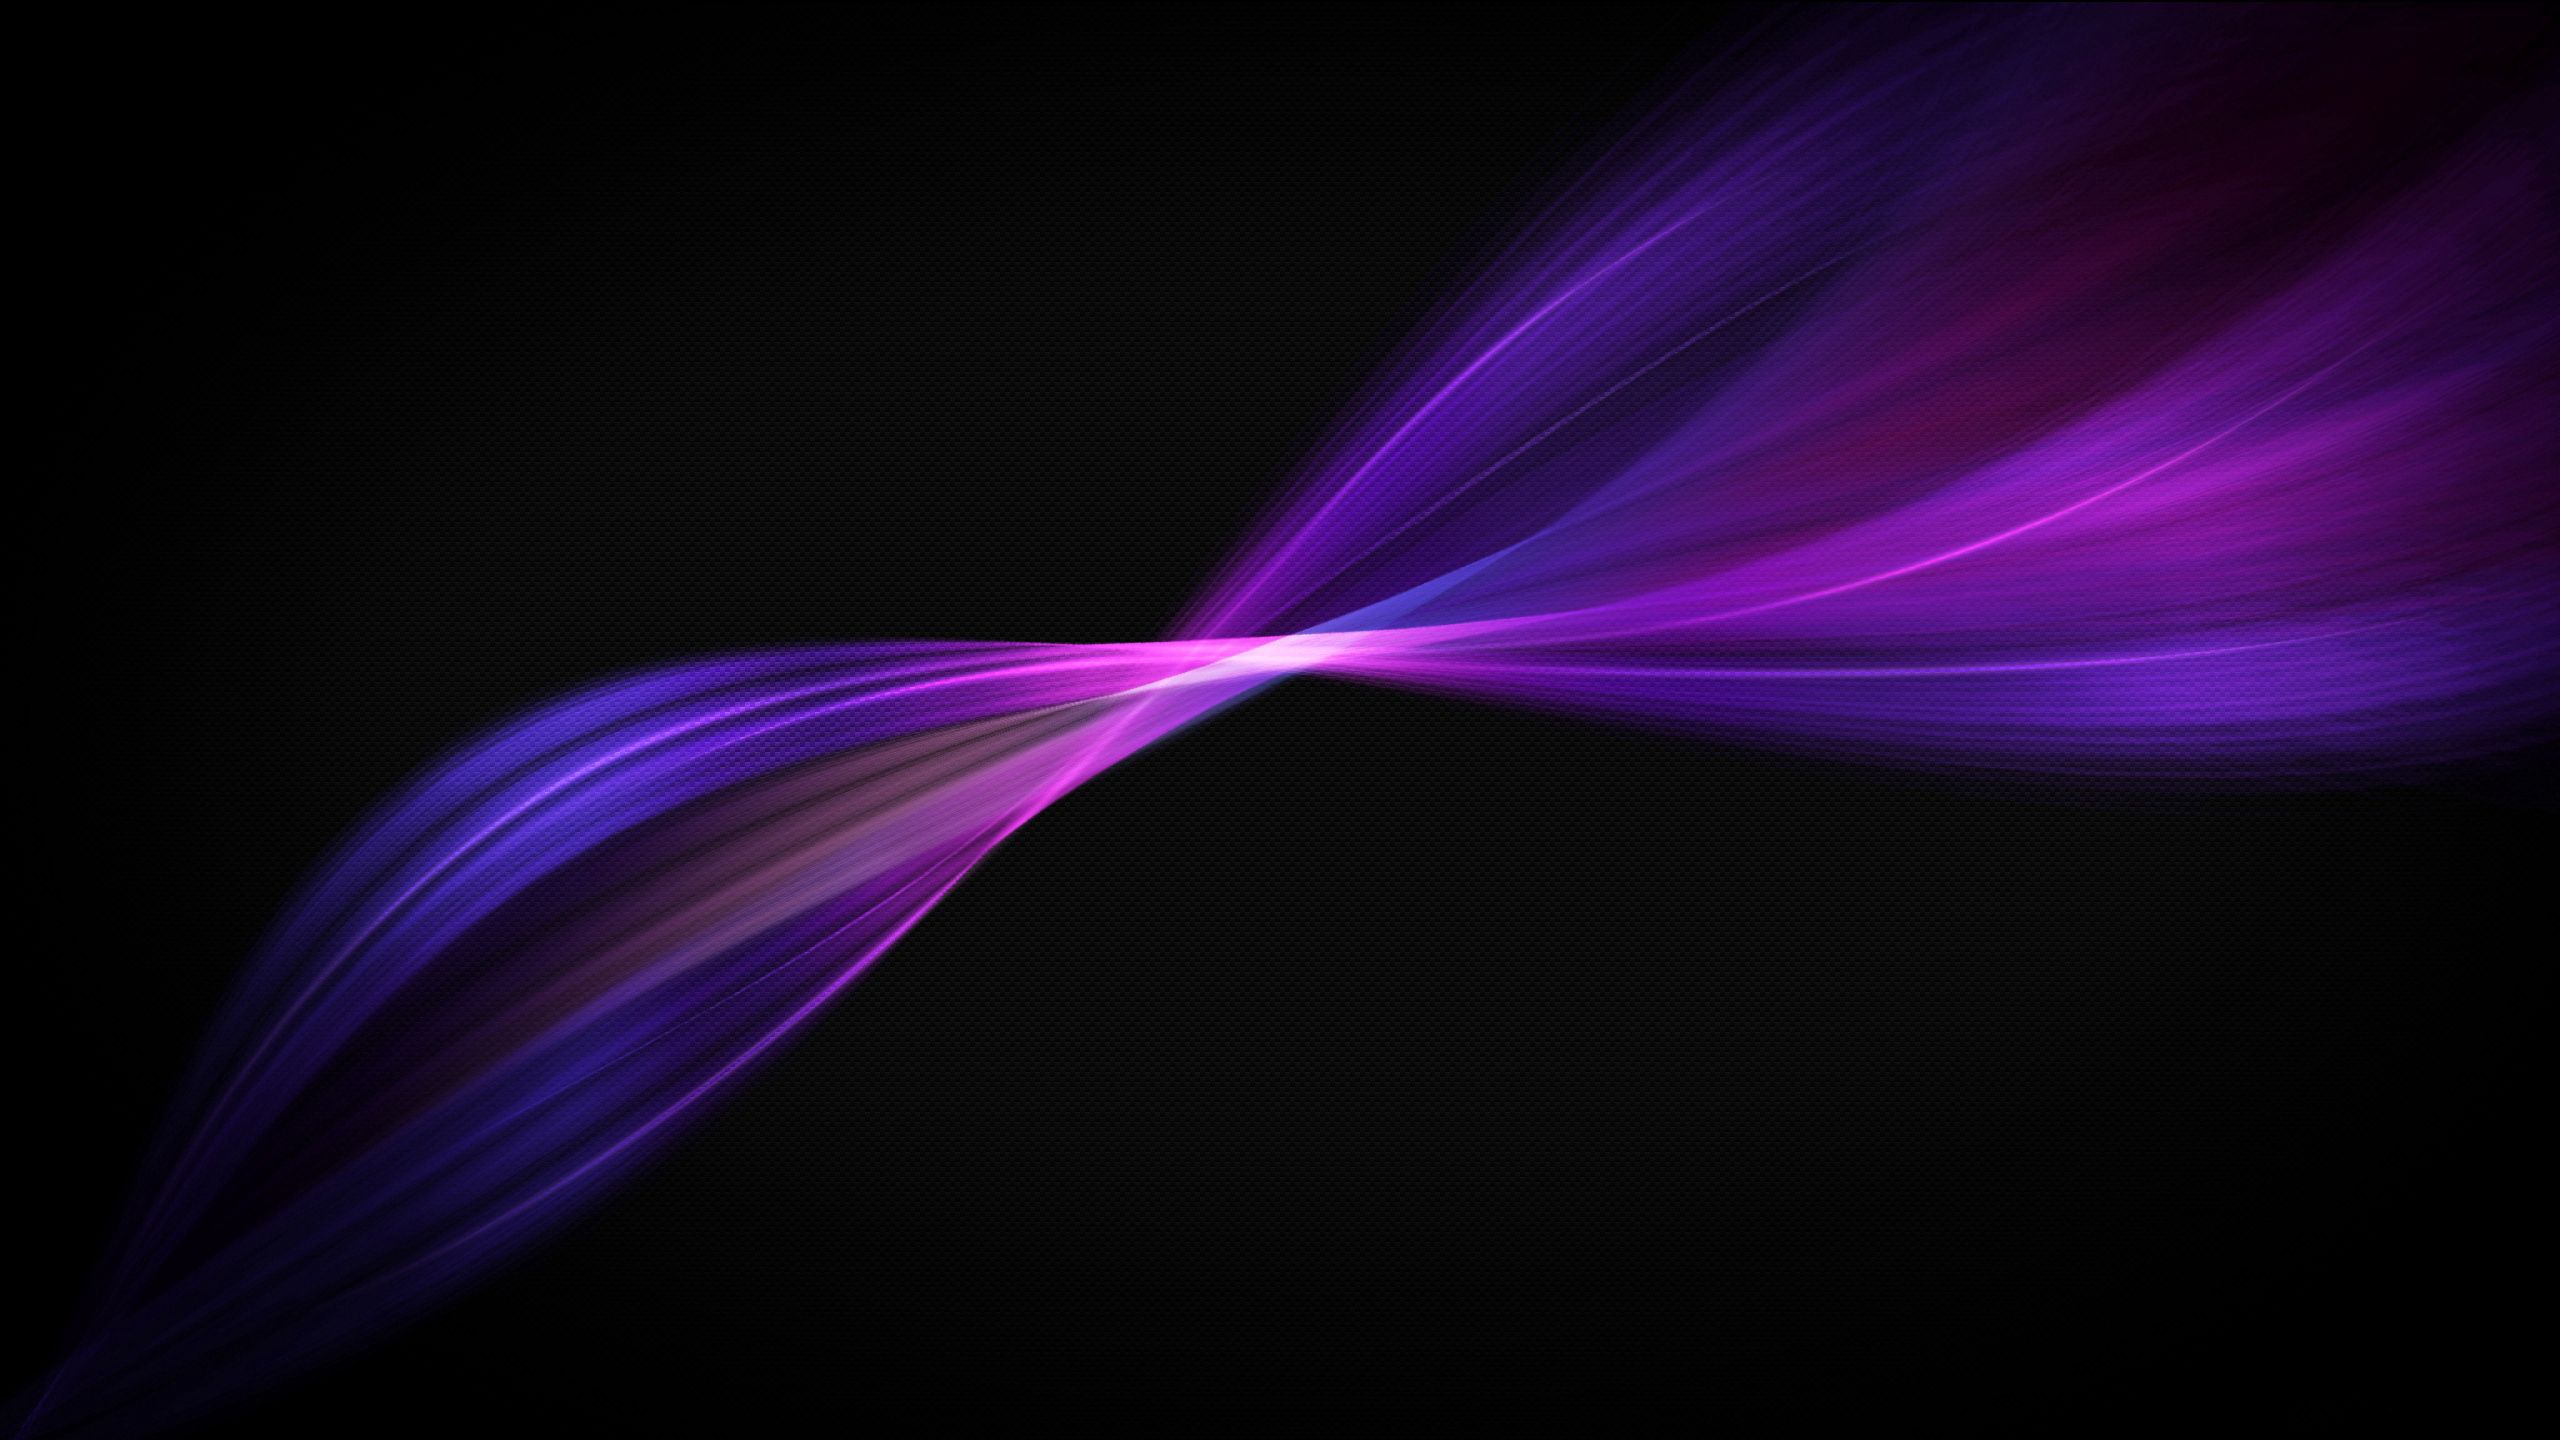 112086 download wallpaper background, abstract, violet, black, lines, color, purple, graphics screensavers and pictures for free